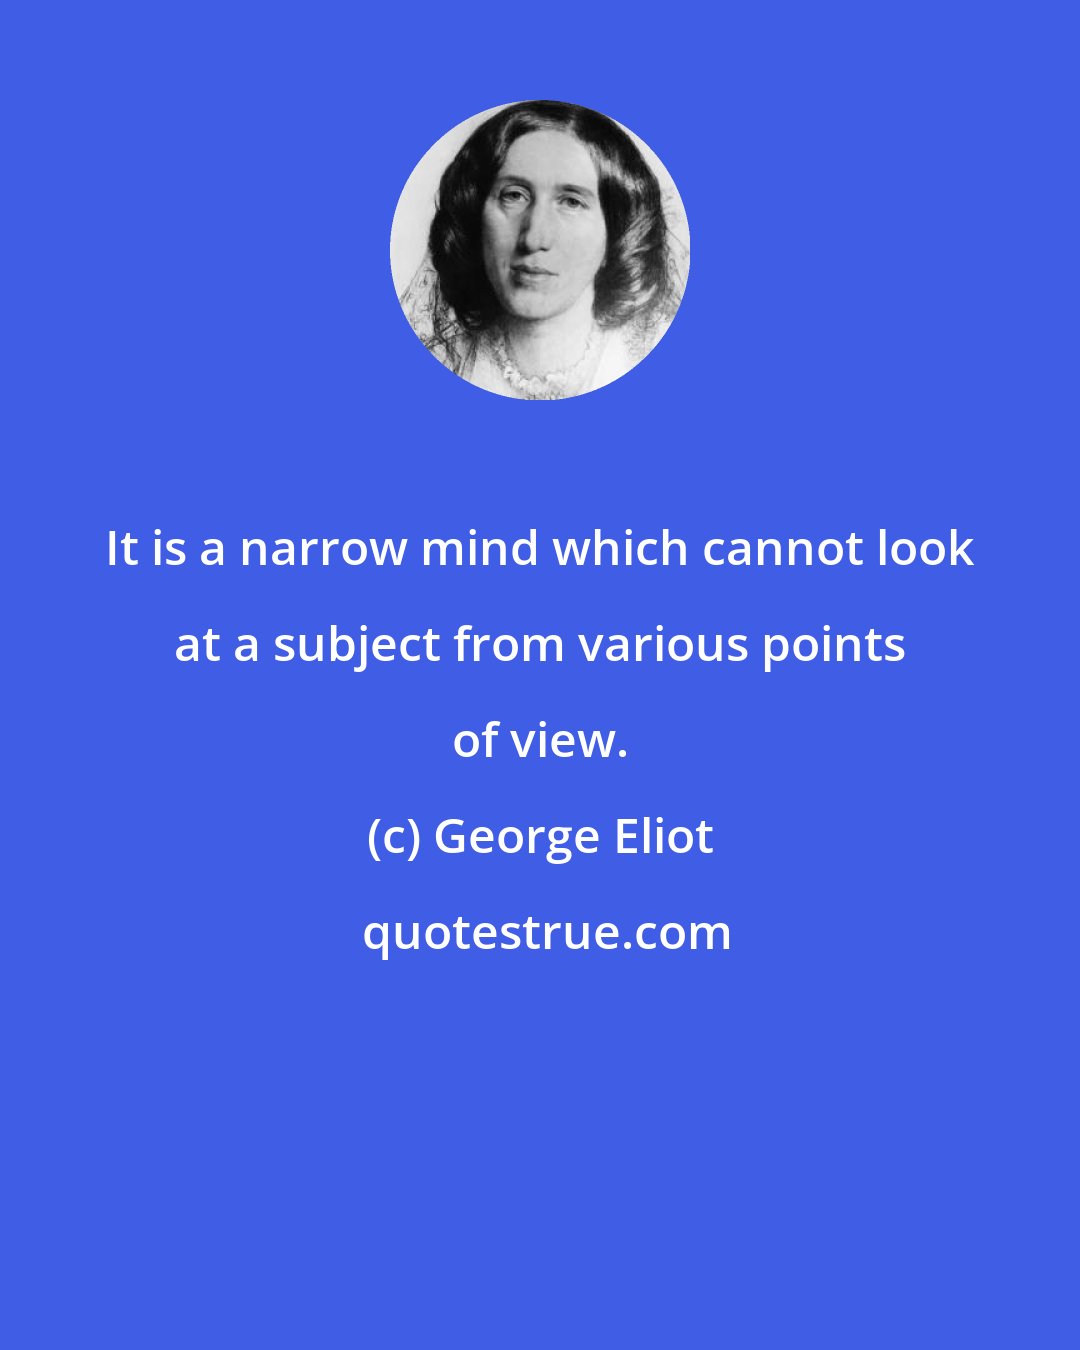 George Eliot: It is a narrow mind which cannot look at a subject from various points of view.